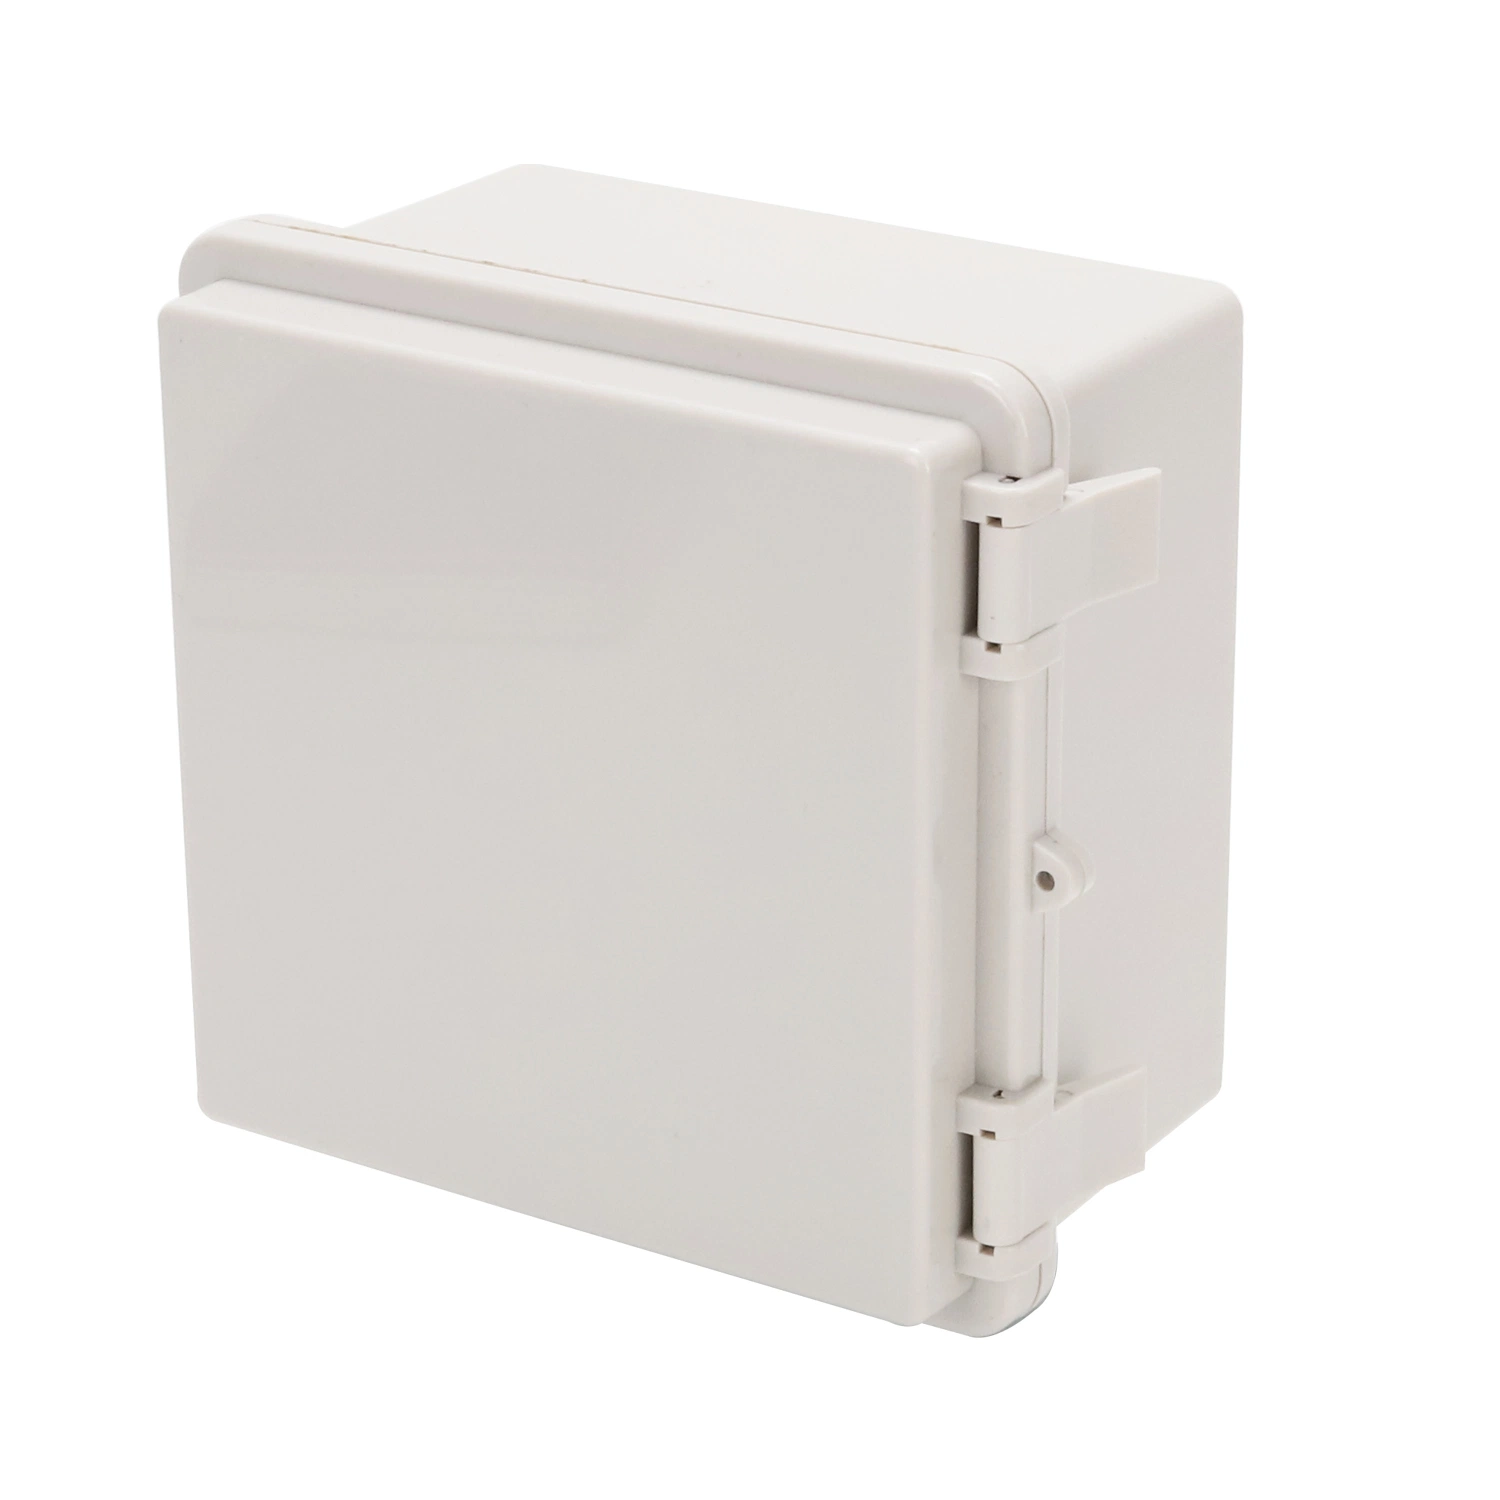 Grey Plastic Cover 150*150*90mm ABS IP66 5.9*5.9*3.5inch Circuit Breakers Protect The Distribution Box